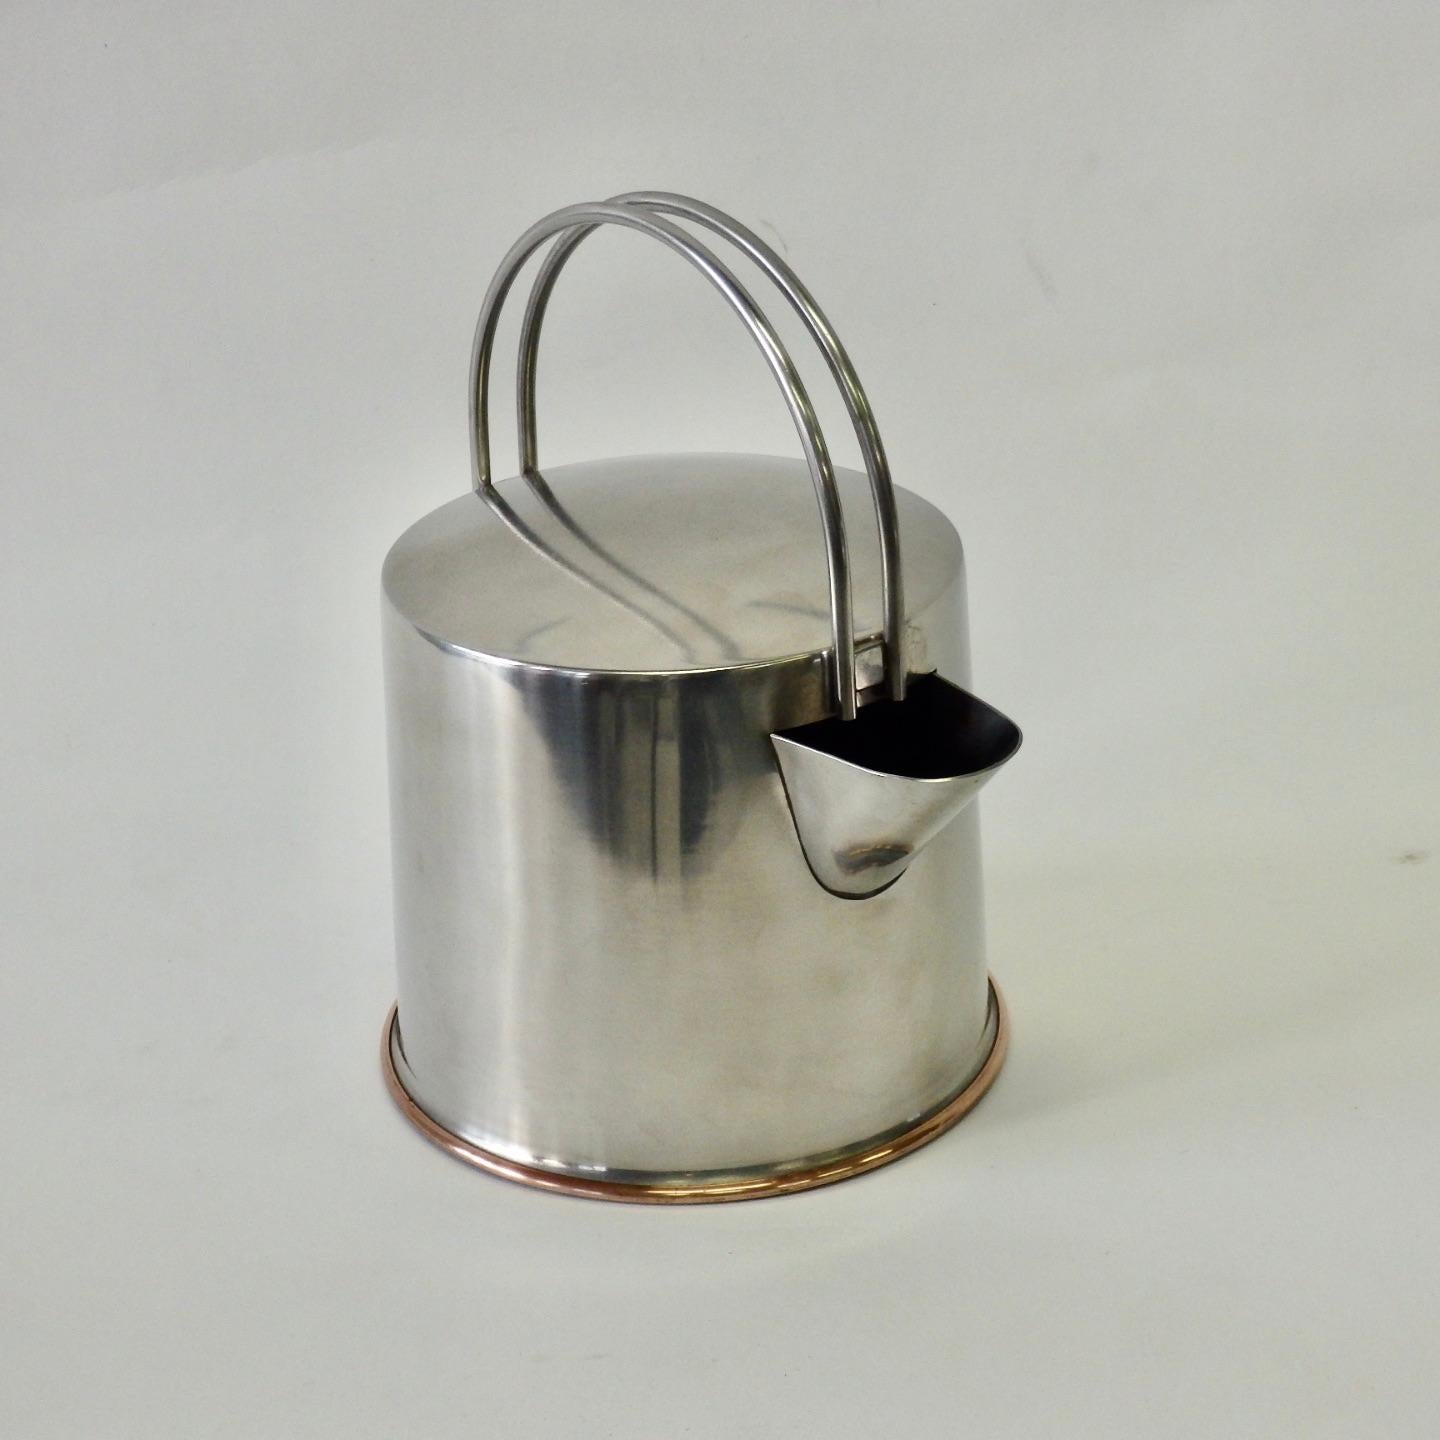 Stainless steel cylinder teapot with copper bottom. Designed by Ole Palsby. Shows wear .